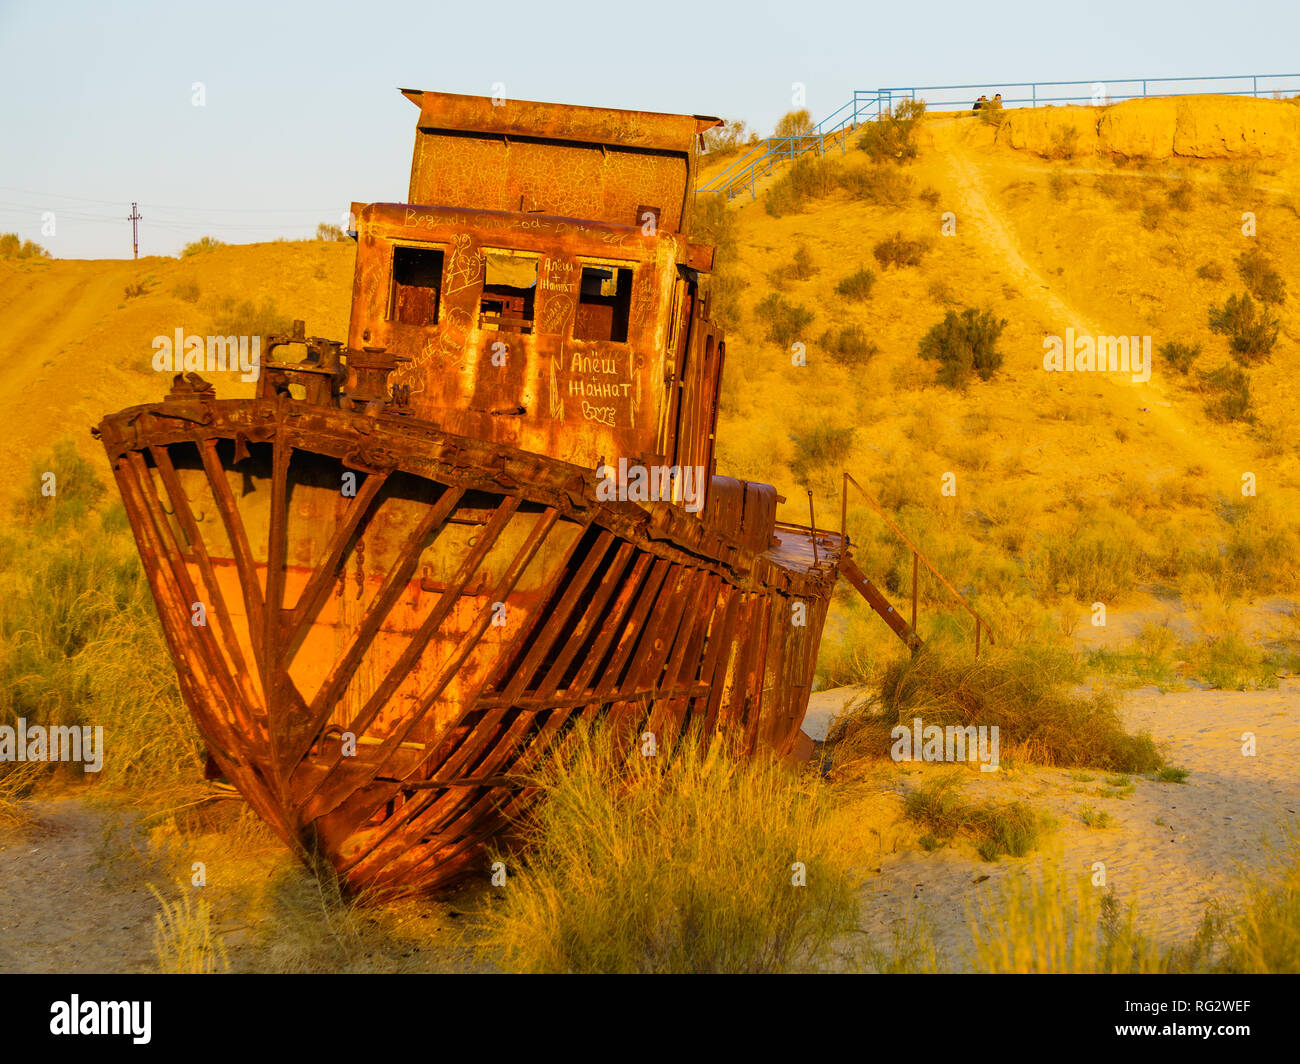 Ship Graveyard in the desert at former Aral Sea in Ubekistan Stock Photo